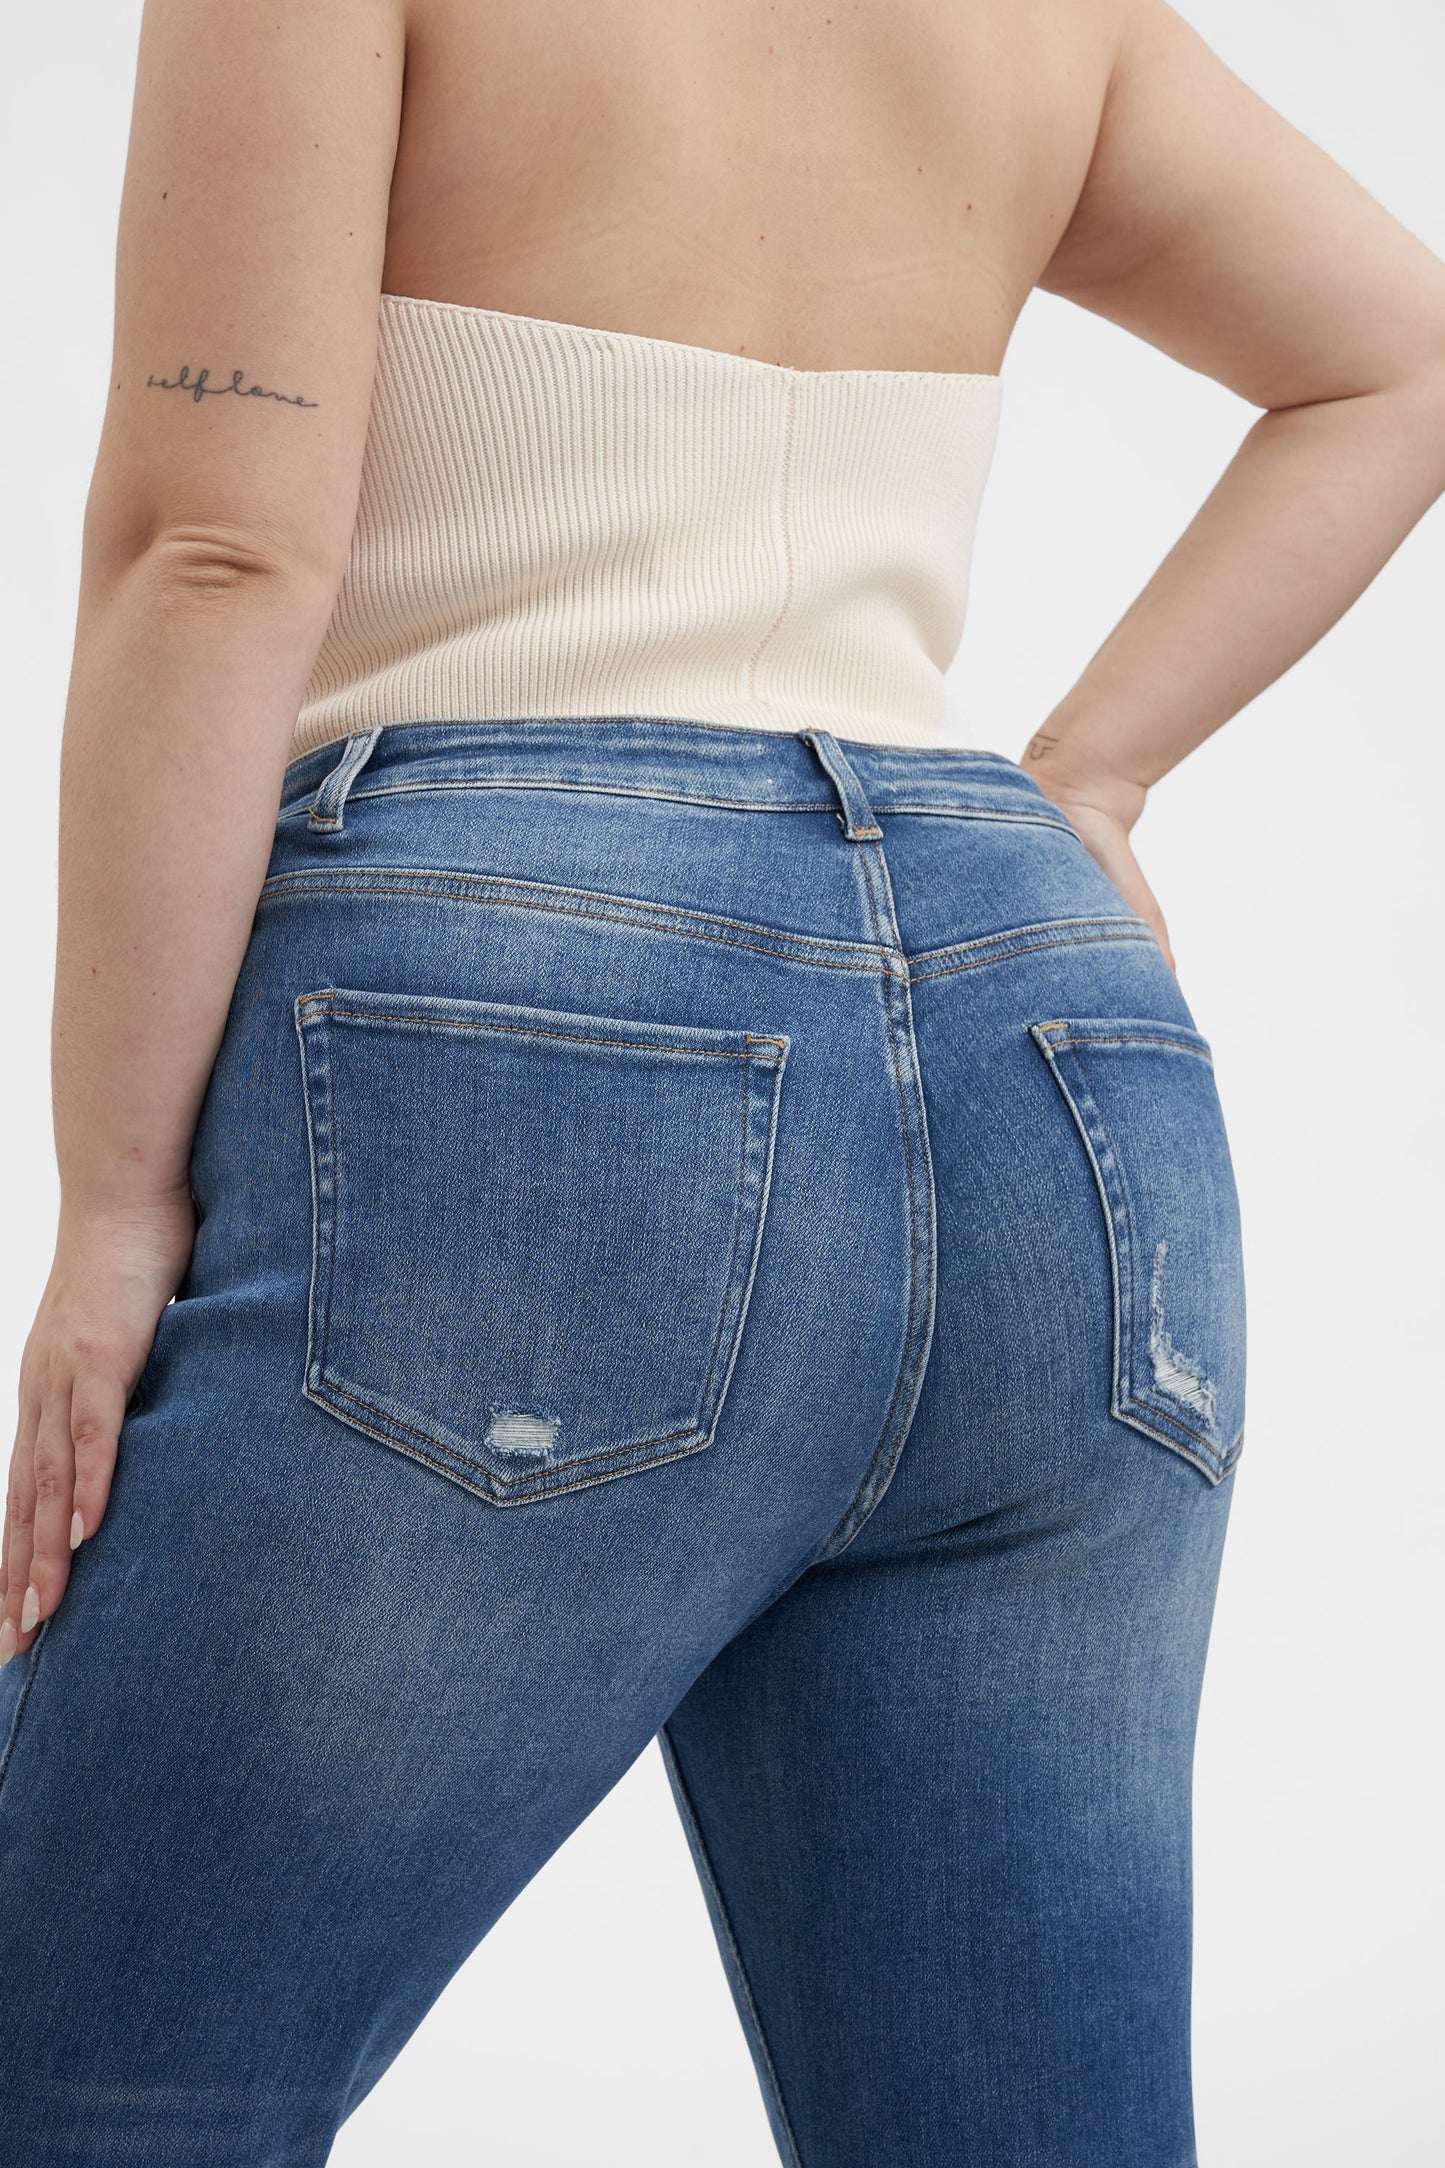 HIGH RISE GRINDED MOM JEANS BYM3059-P BLUELOVER PLUS SIZE